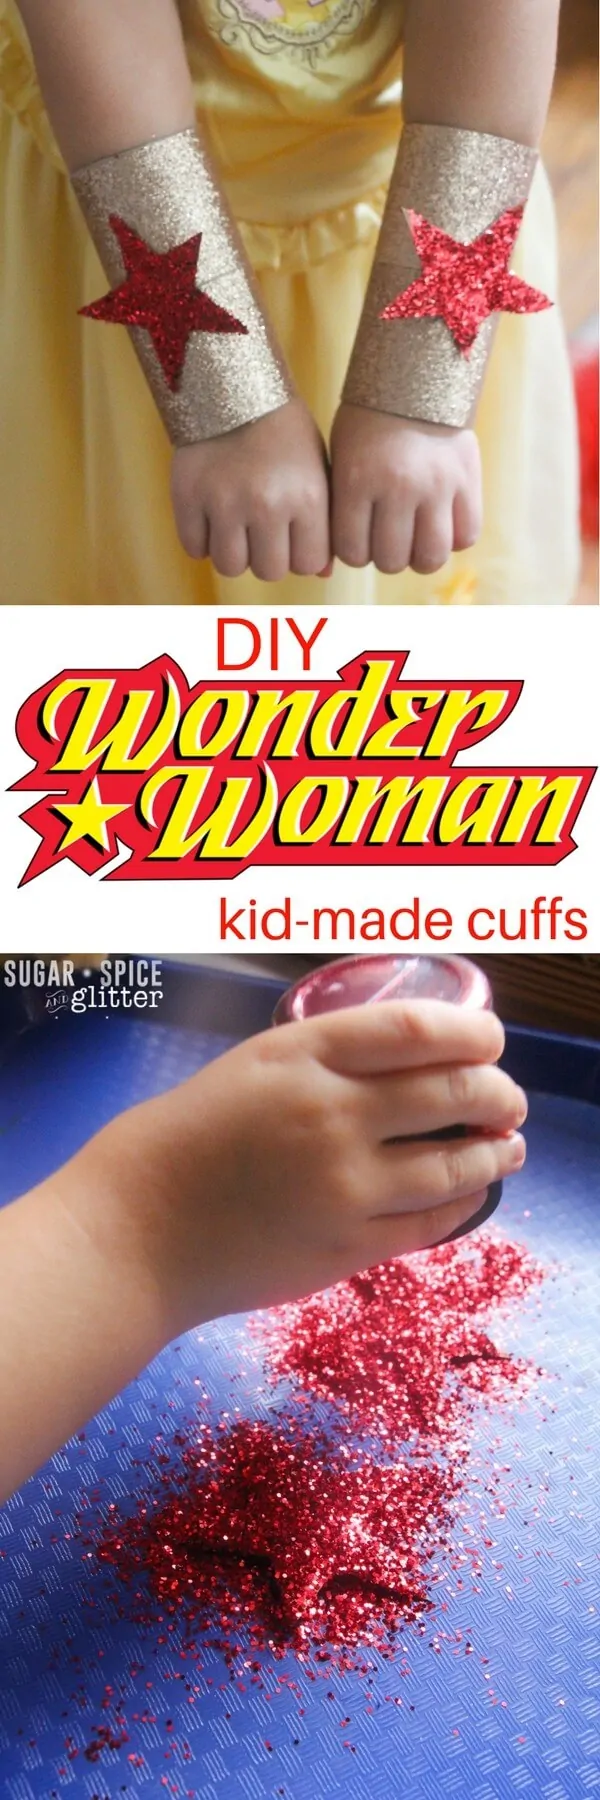 DIY Wonder Woman Cuffs for an easy homemade costume kids can make themselves! This quick and easy craft transforms it's maker into an indestructible superhero with just 10 minutes of crafting time and some glitter